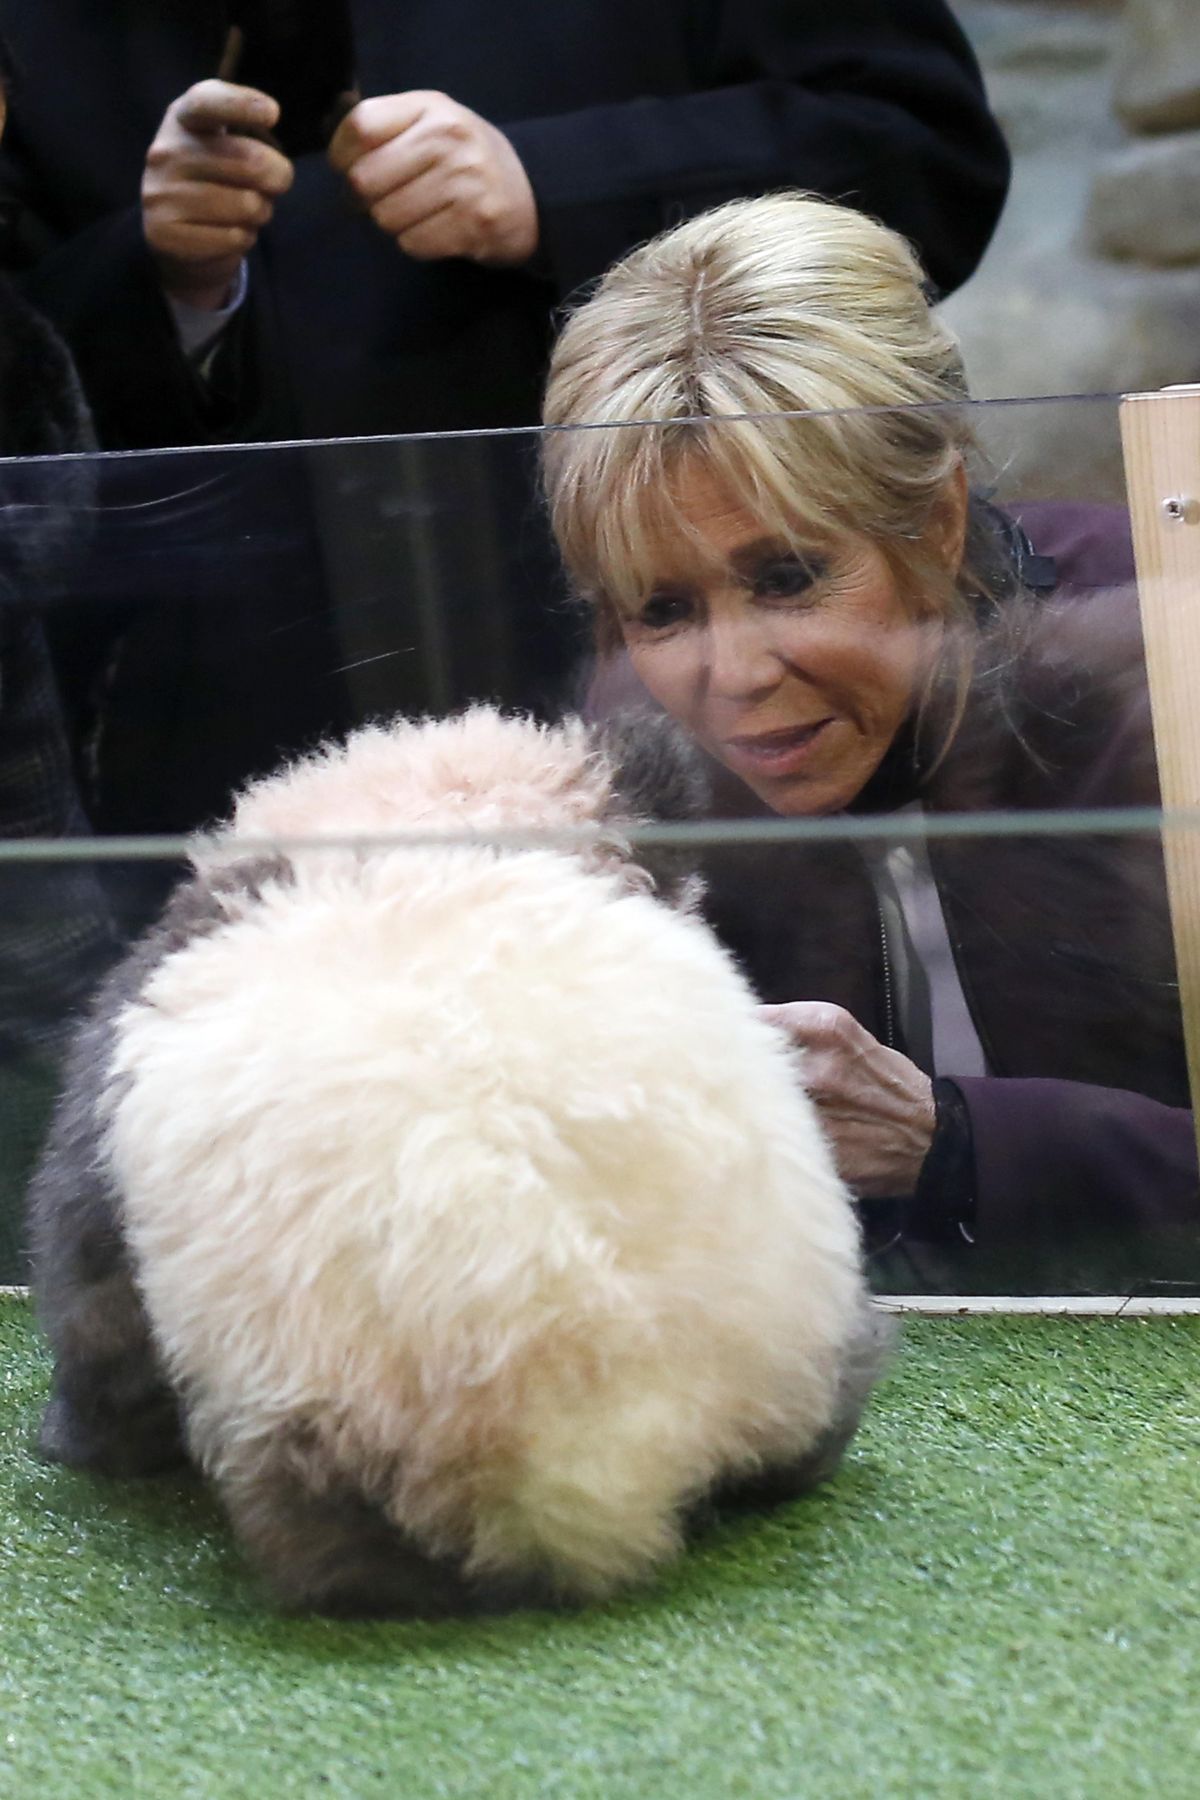 French First lady Brigitte Macron attends a naming ceremony of the panda born at the Beauval Zoo in Saint-Aignan-sur-Cher, France, Monday, Dec. 4, 2017. (Thibault Camus / Associated Press)